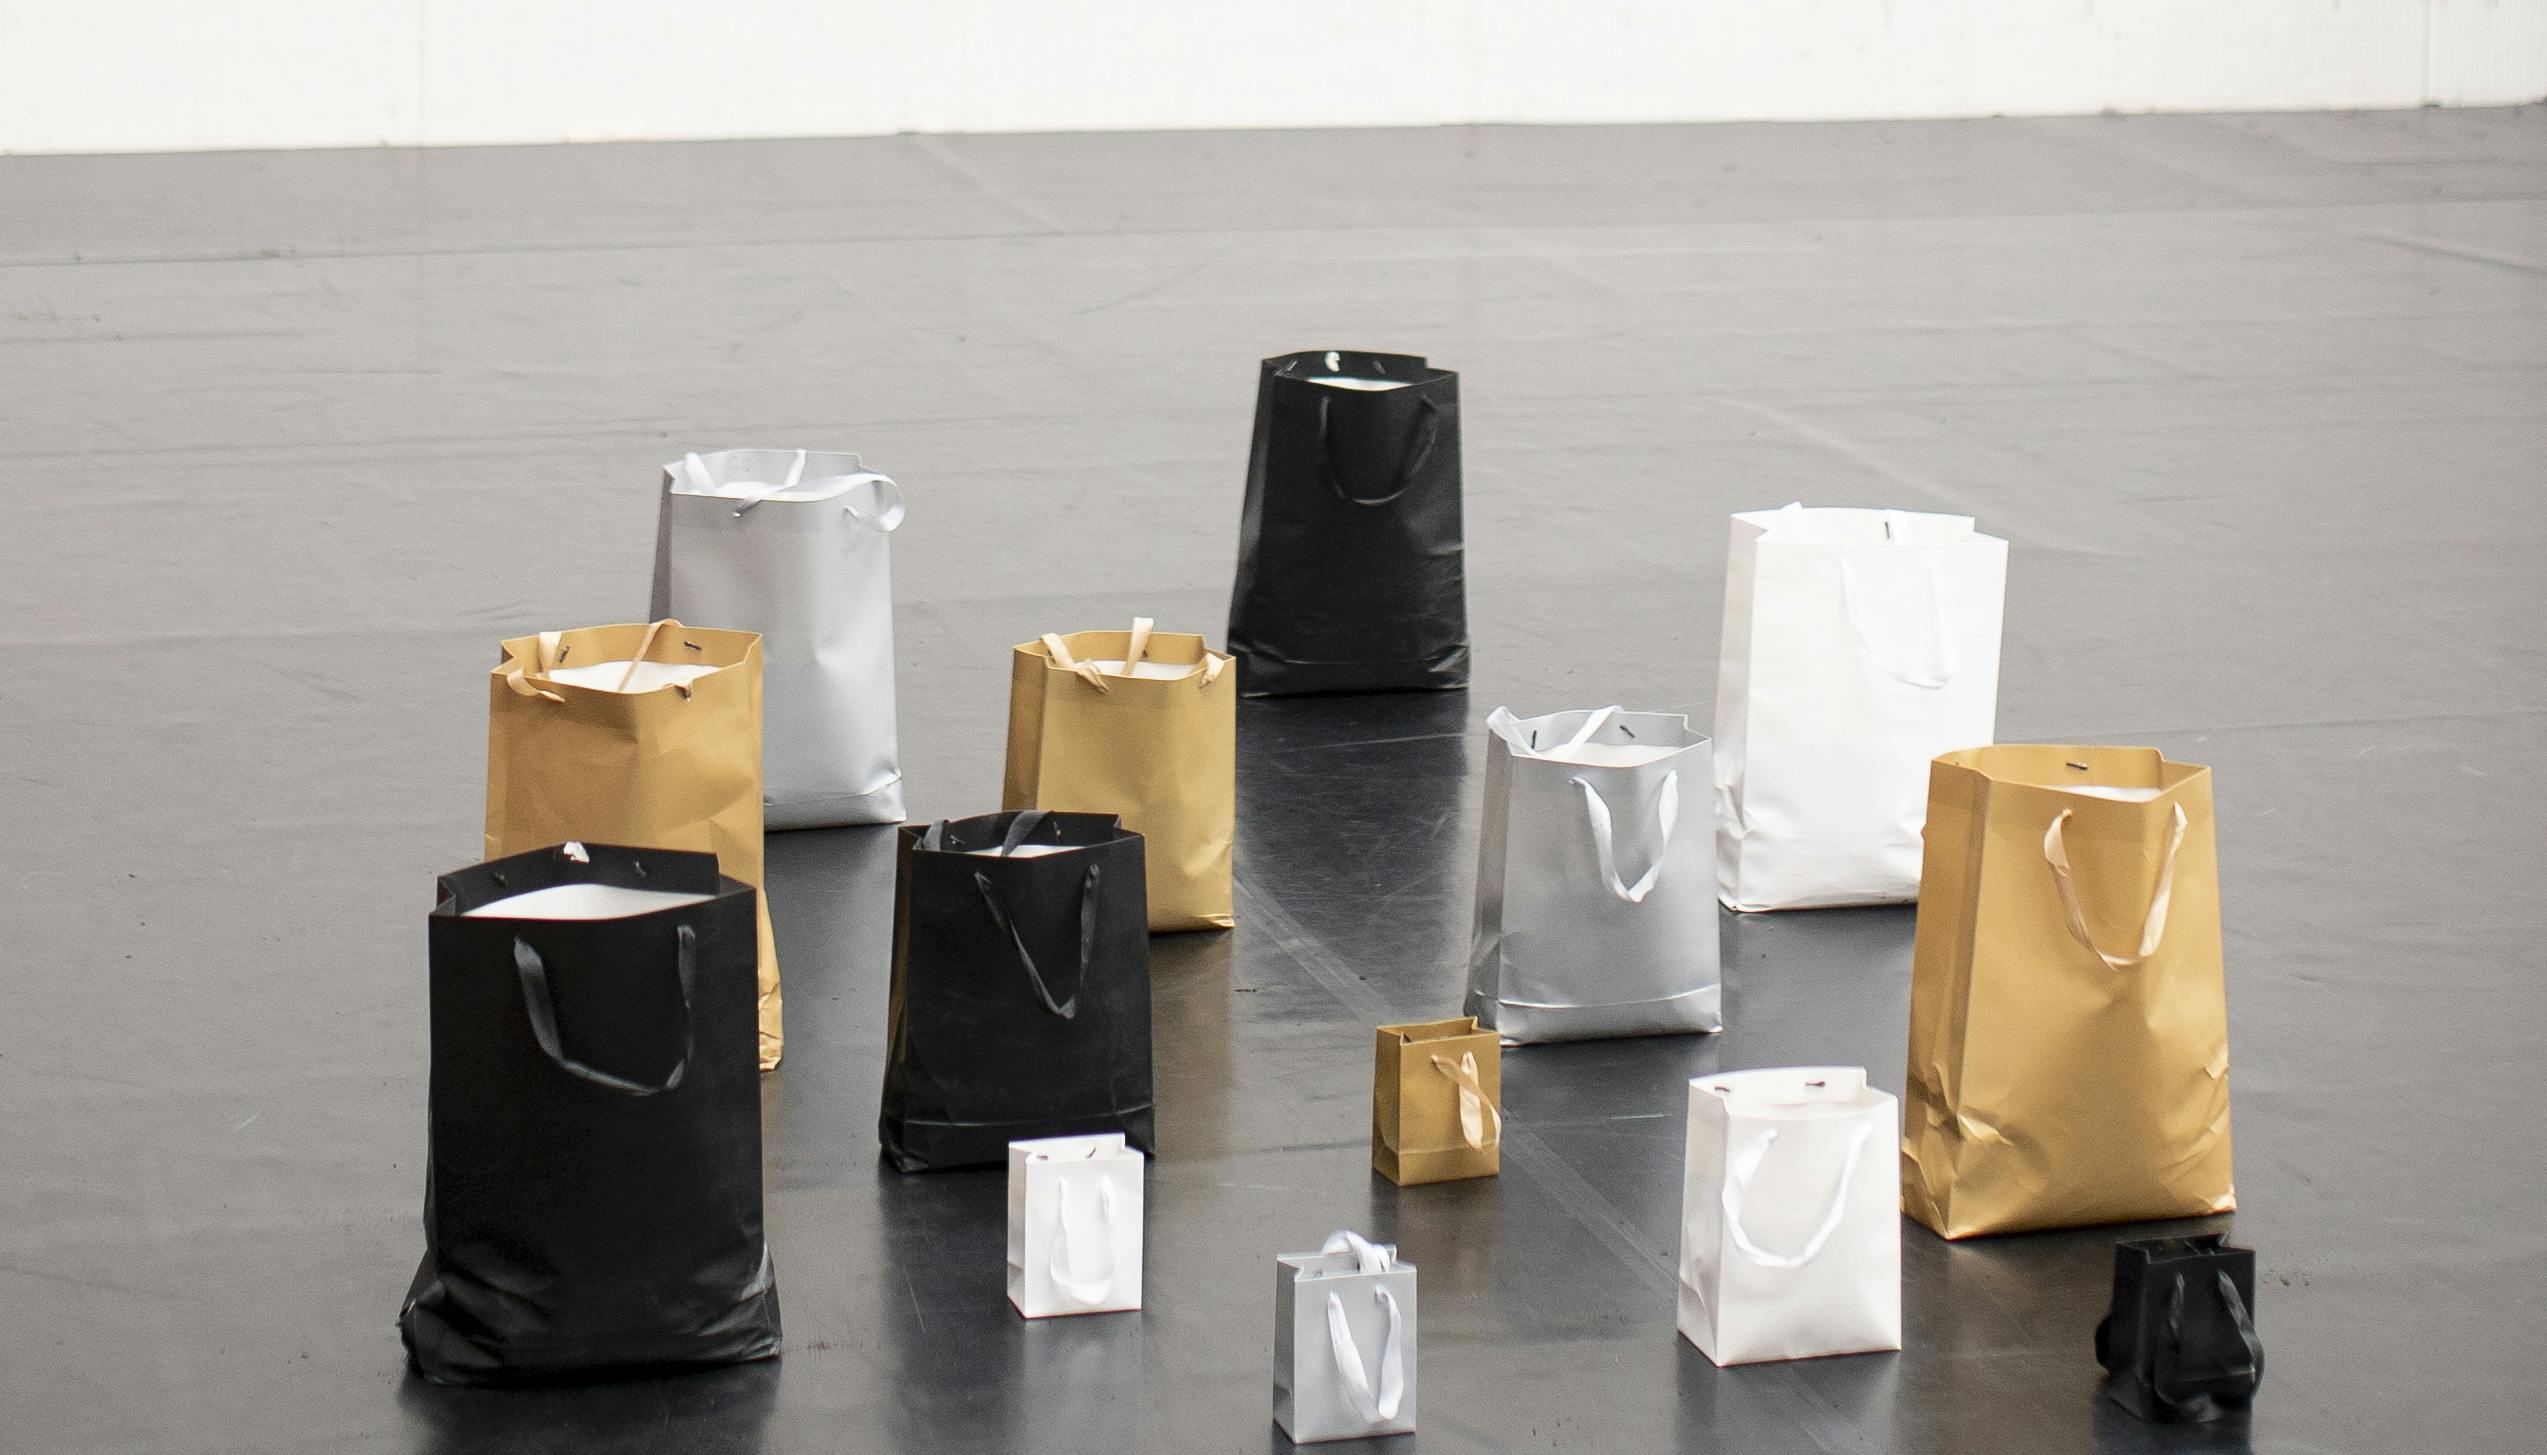 Series of black, white, silver and gold paper bags in different sizes